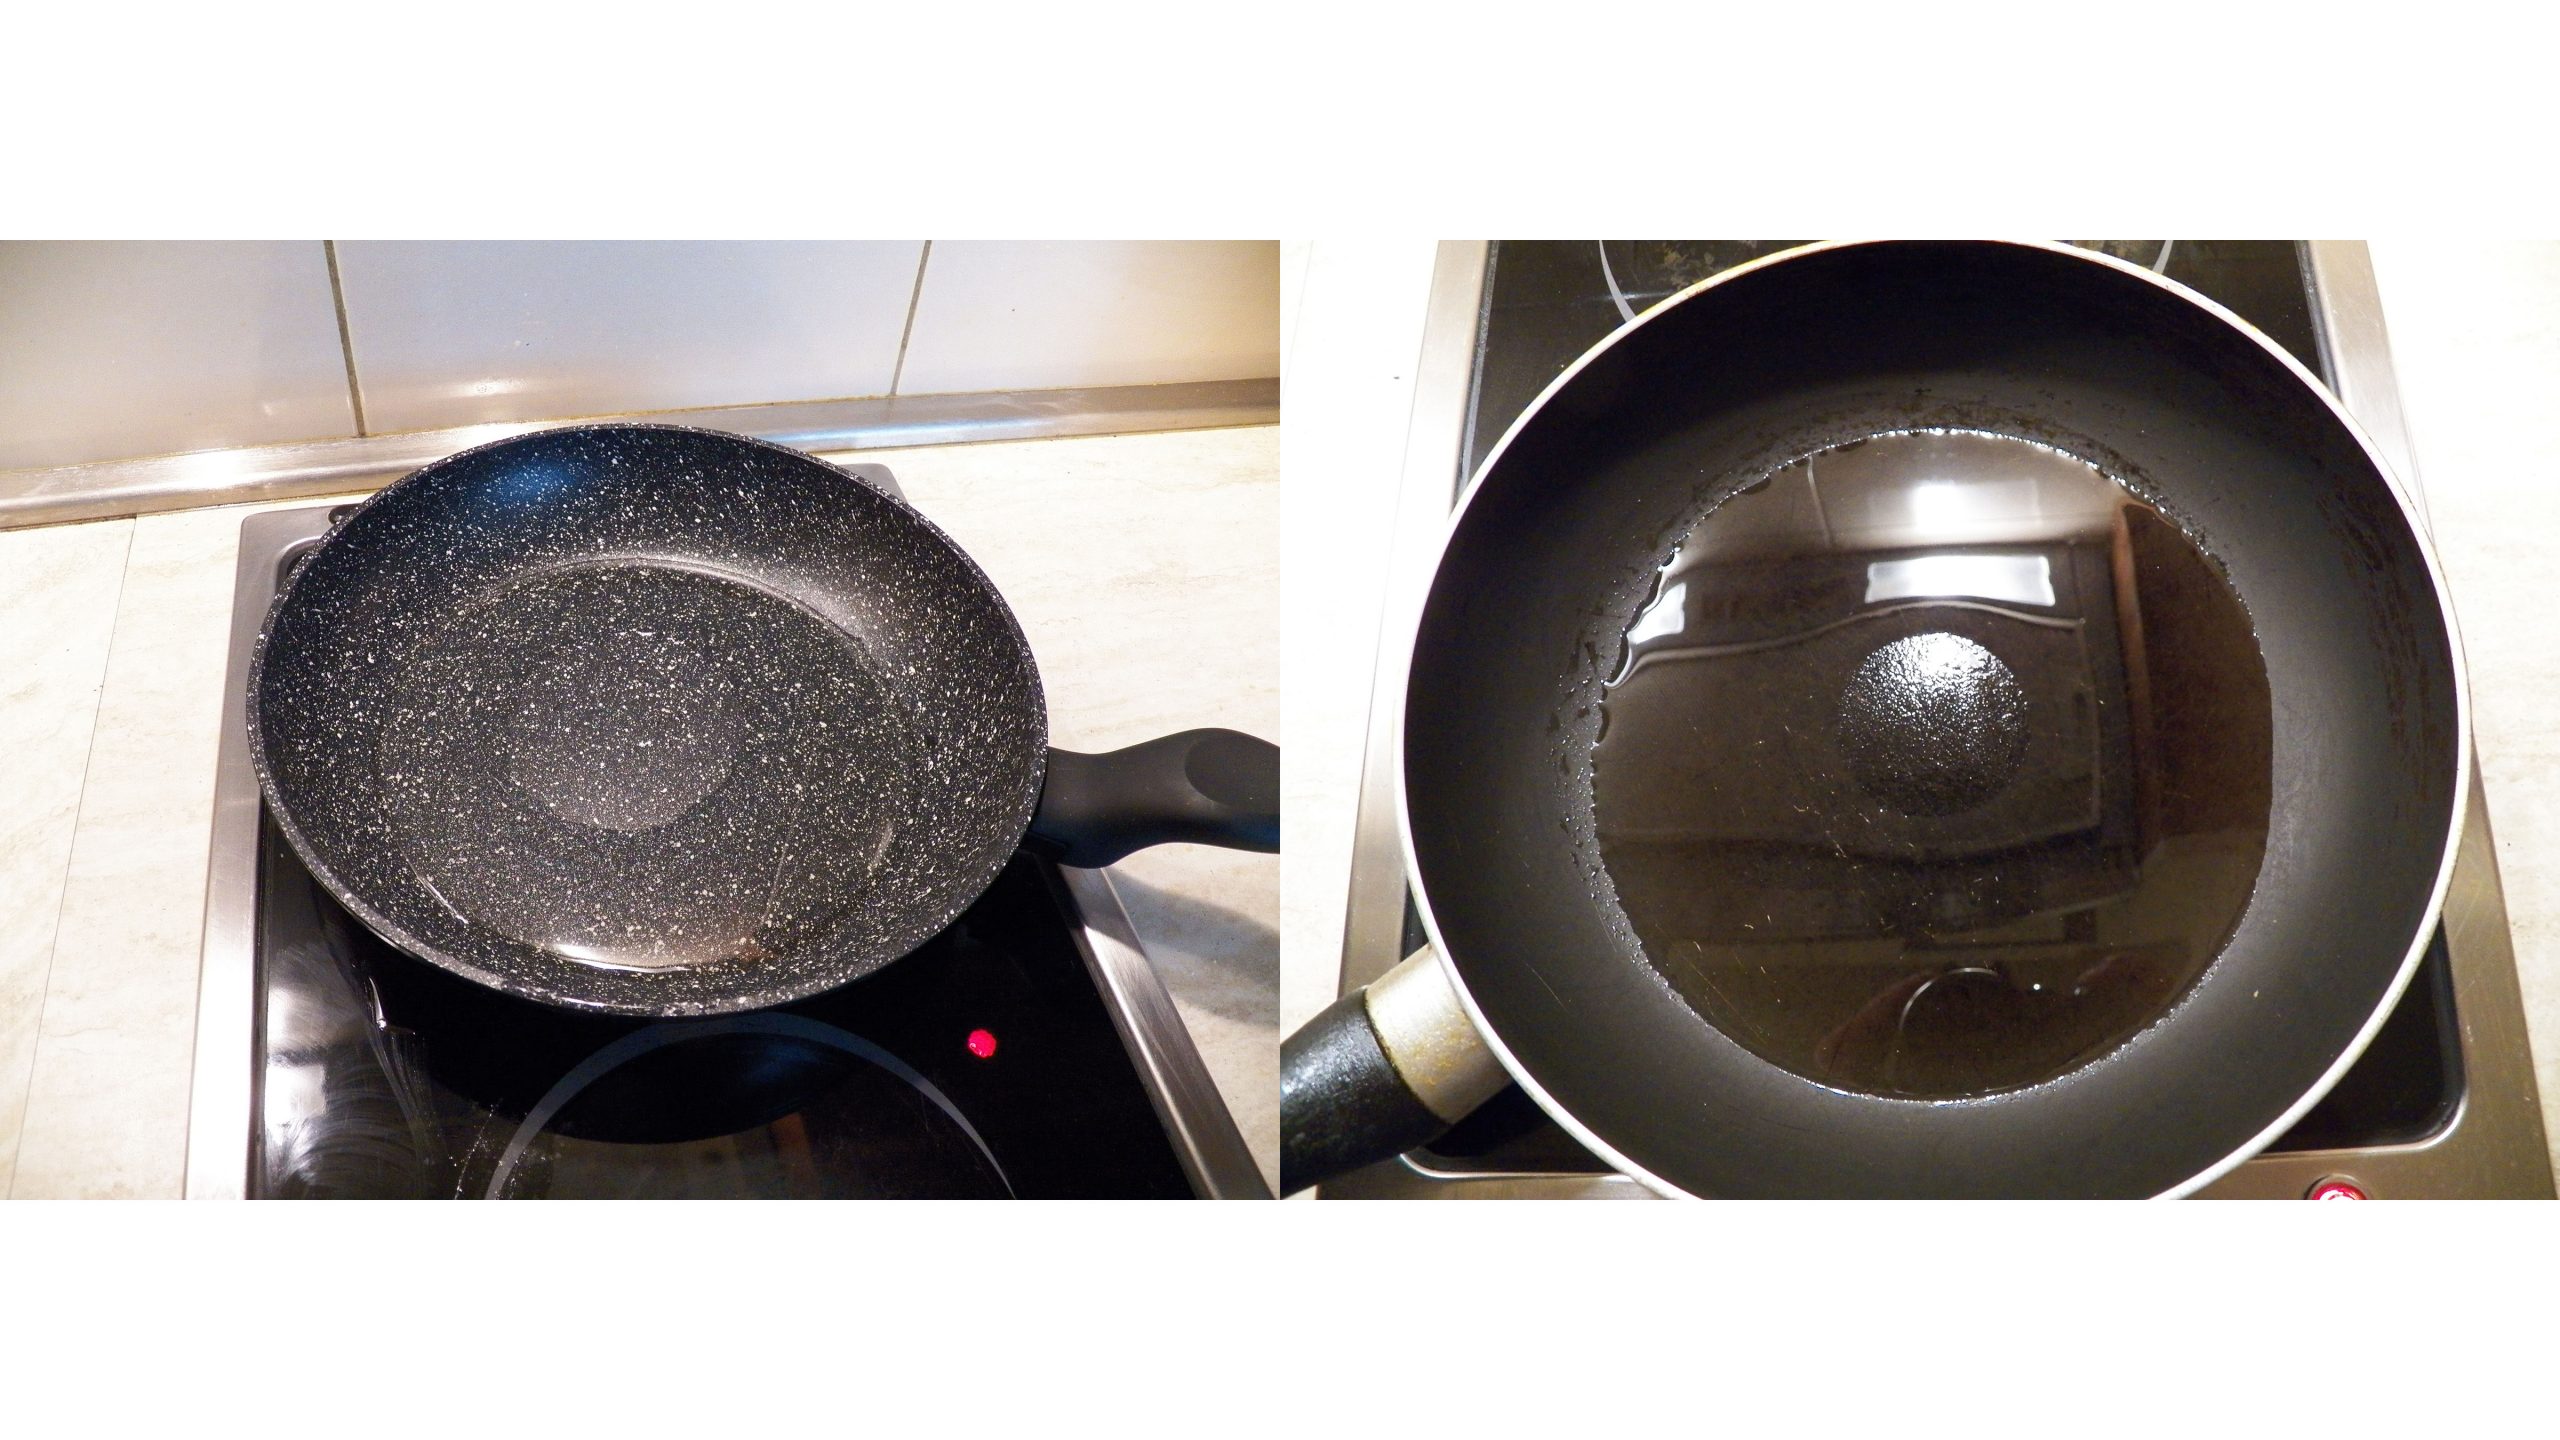 Reasons To Use Nonstick Cookware, Teflon Coating